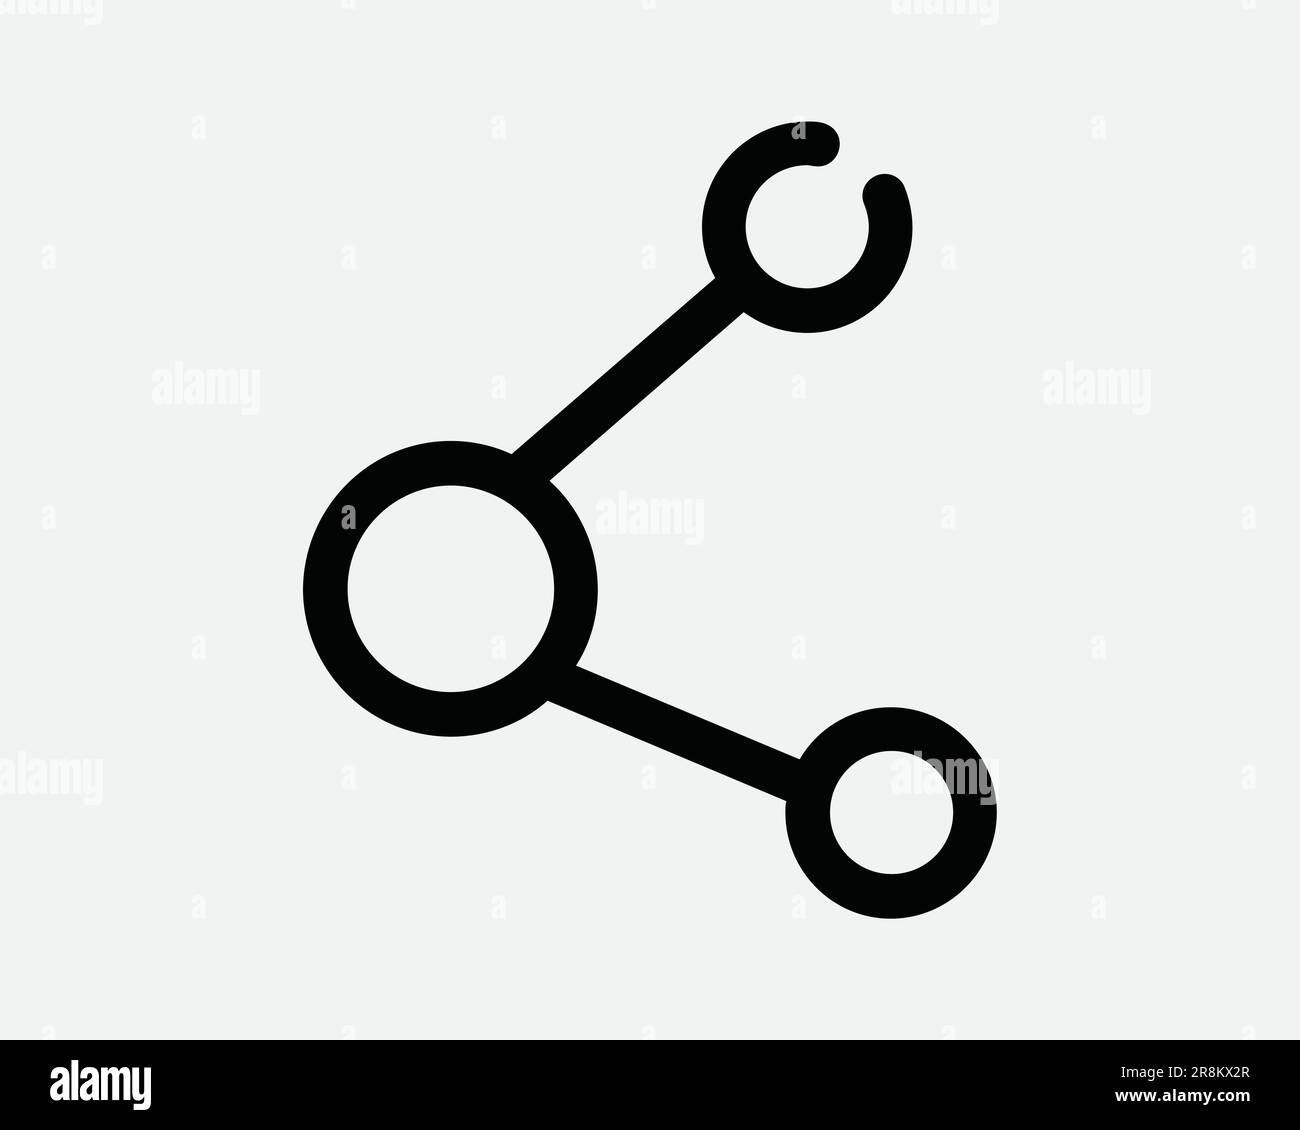 Network Link Icon. Connect Connection Community Social Networking Marketing. Black White Sign Symbol Illustration Artwork Graphic Clipart EPS Vector Stock Vector